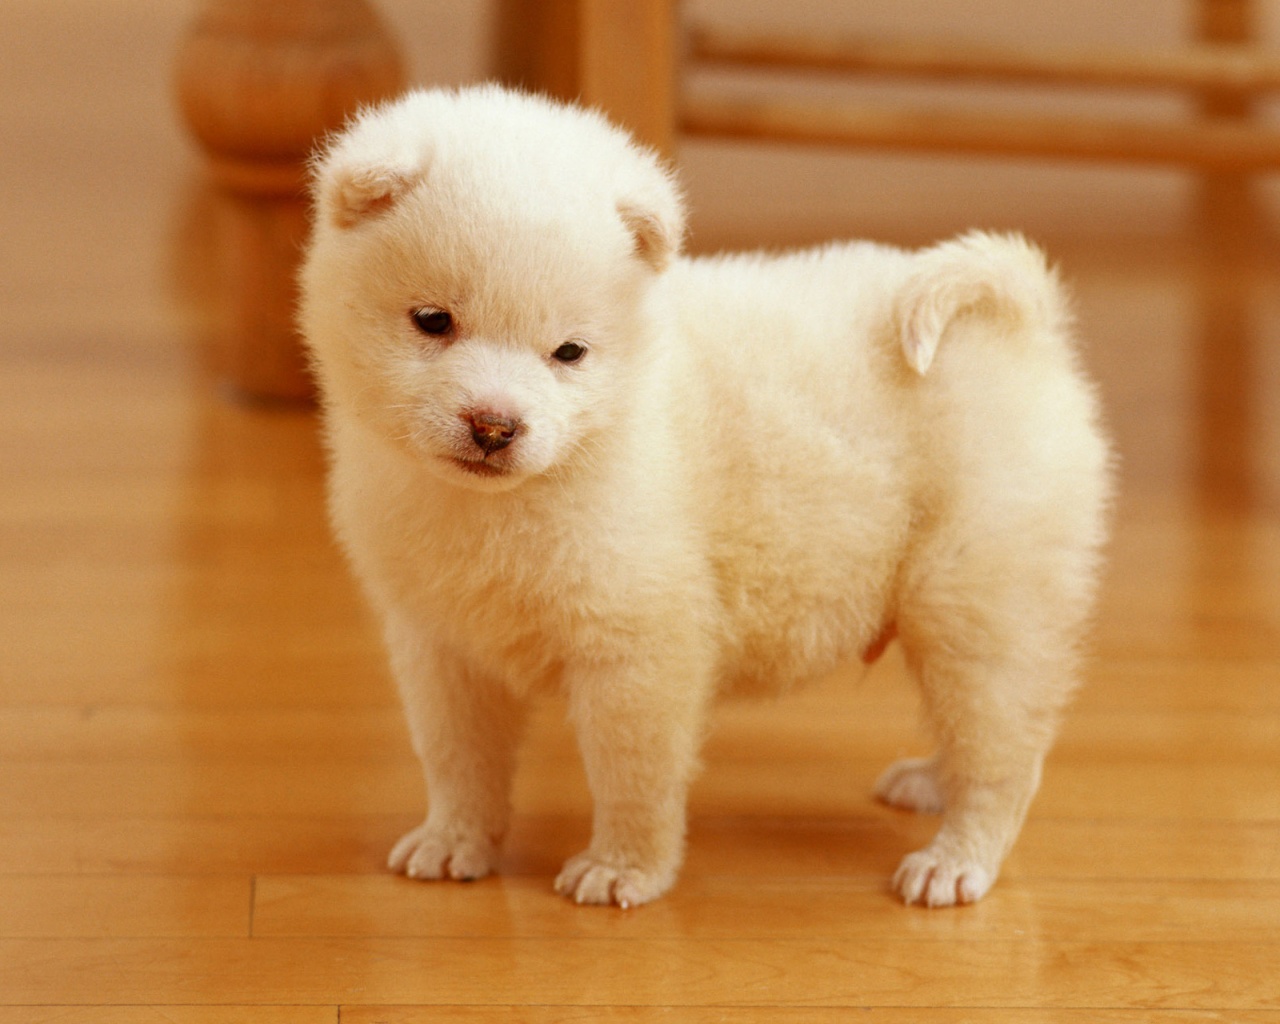 Rare Pictures Here Is The Collection Of Cute Puppies Wallpaper